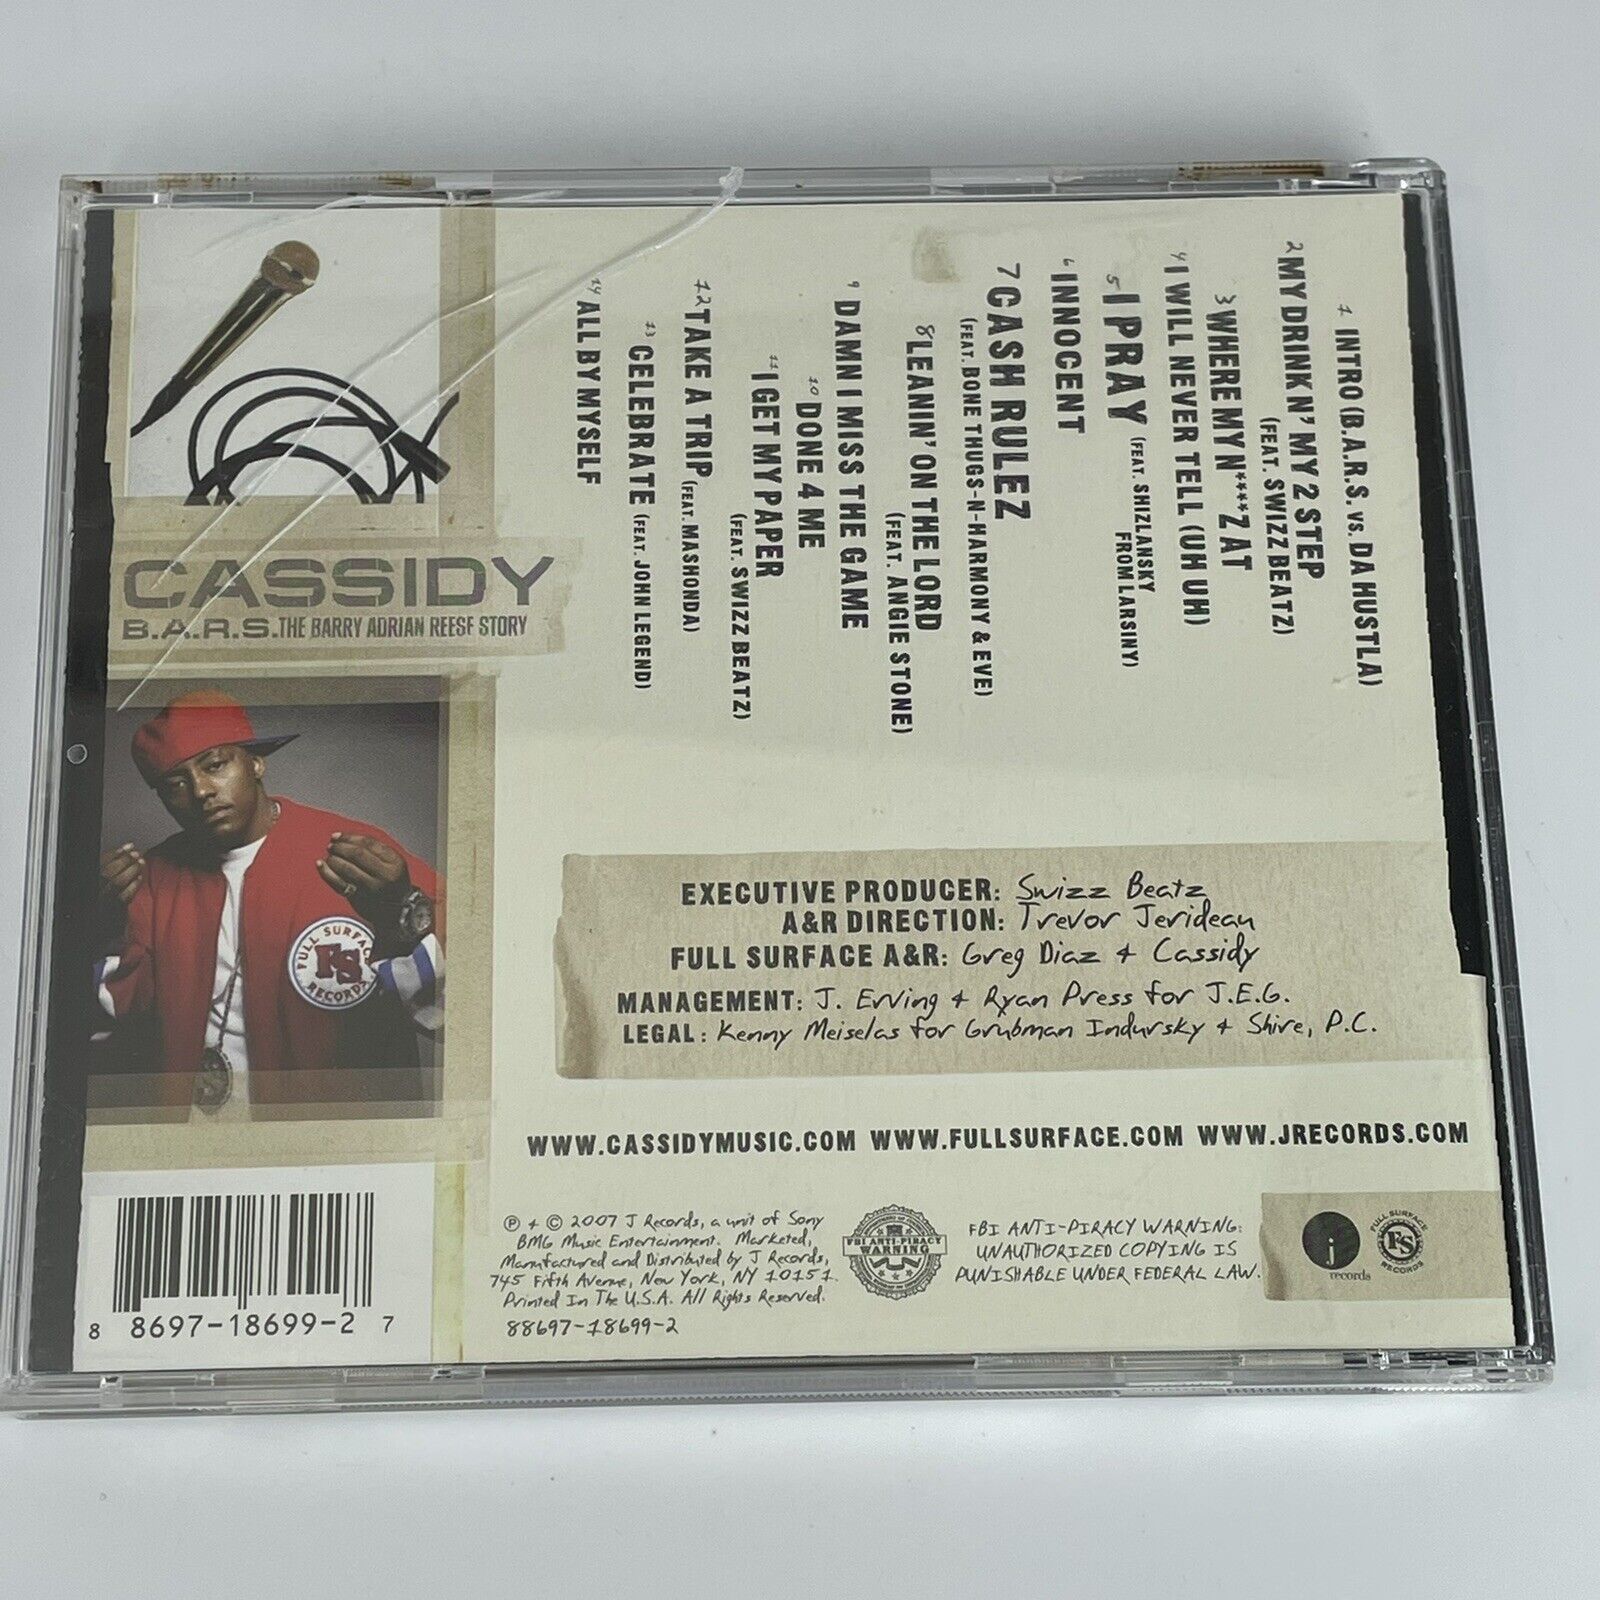 B.A.R.S. The Barry Adrian Reese Story by Cassidy CD 2007 J Records Gangsta Rap